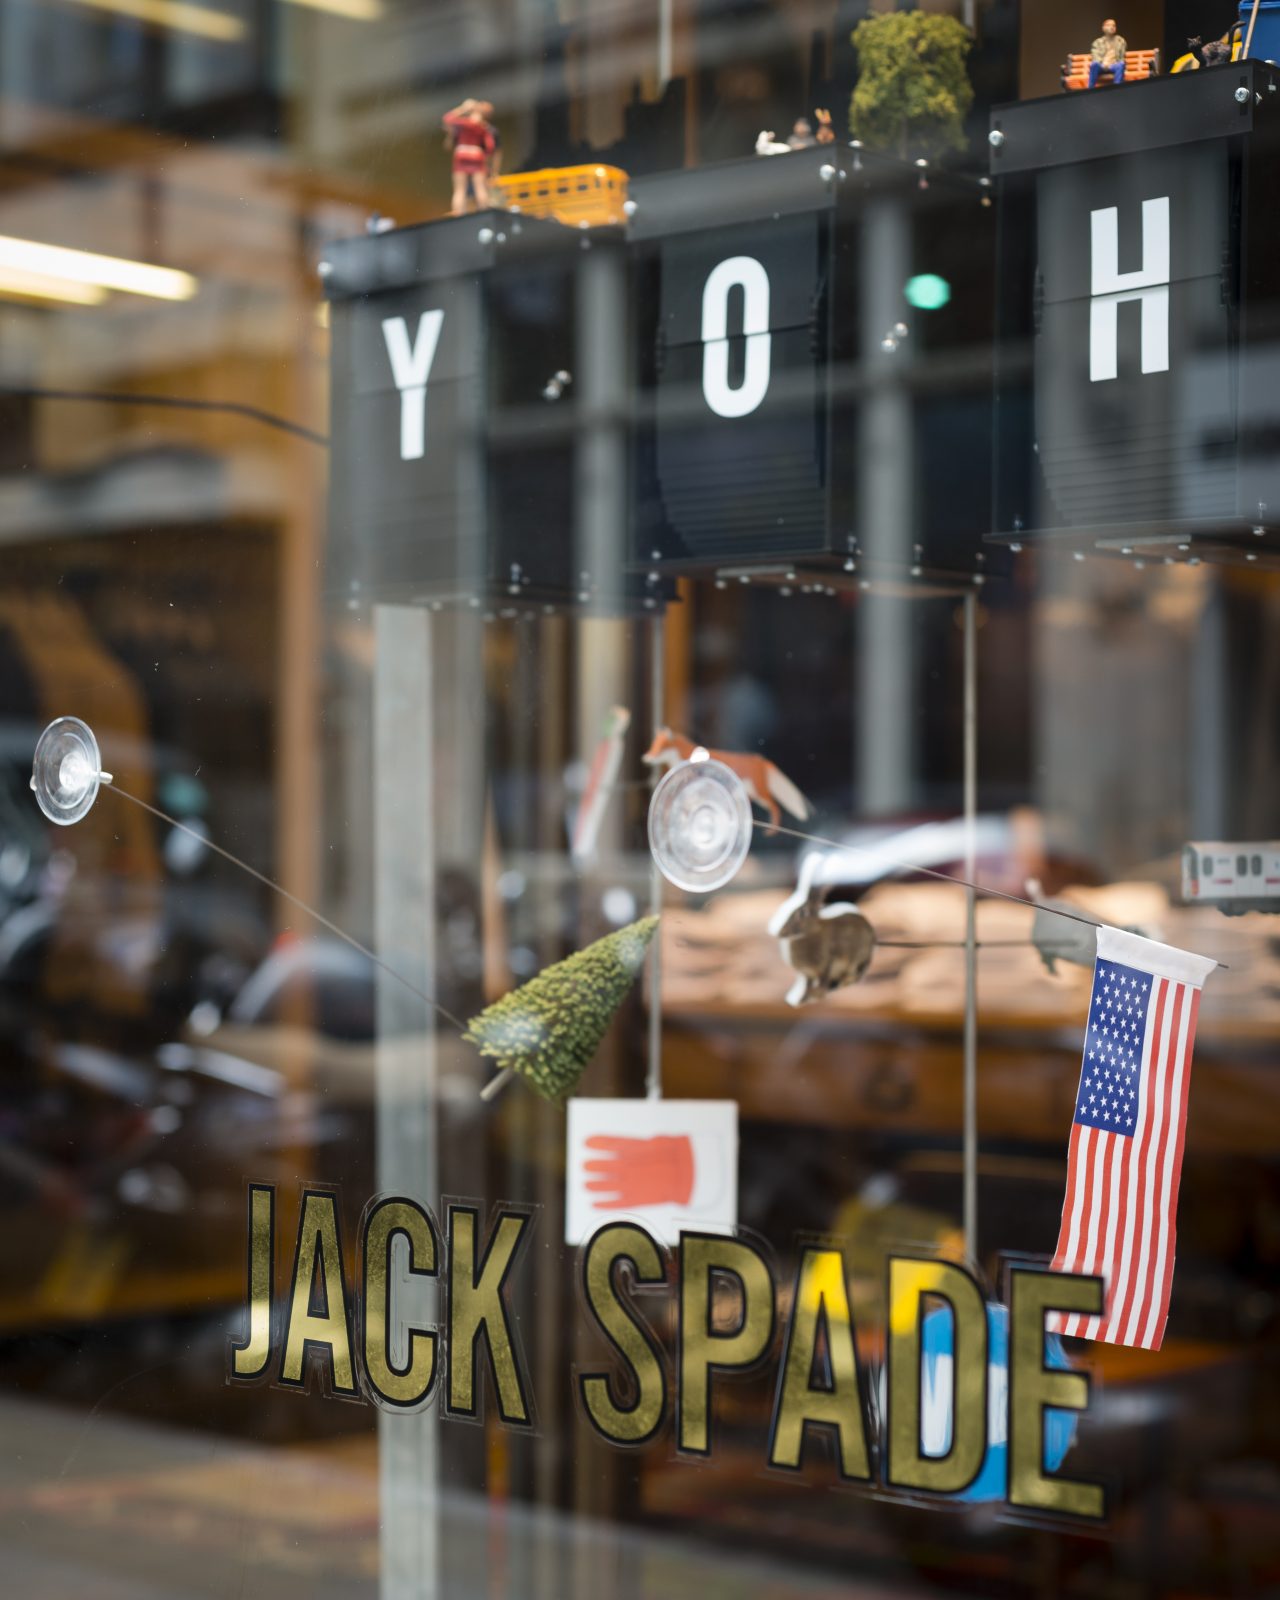 Mobile Studio at Jack Spade. RIBA Regent St Windows Project. Architecture and Interior Photography by Jim Stephenson